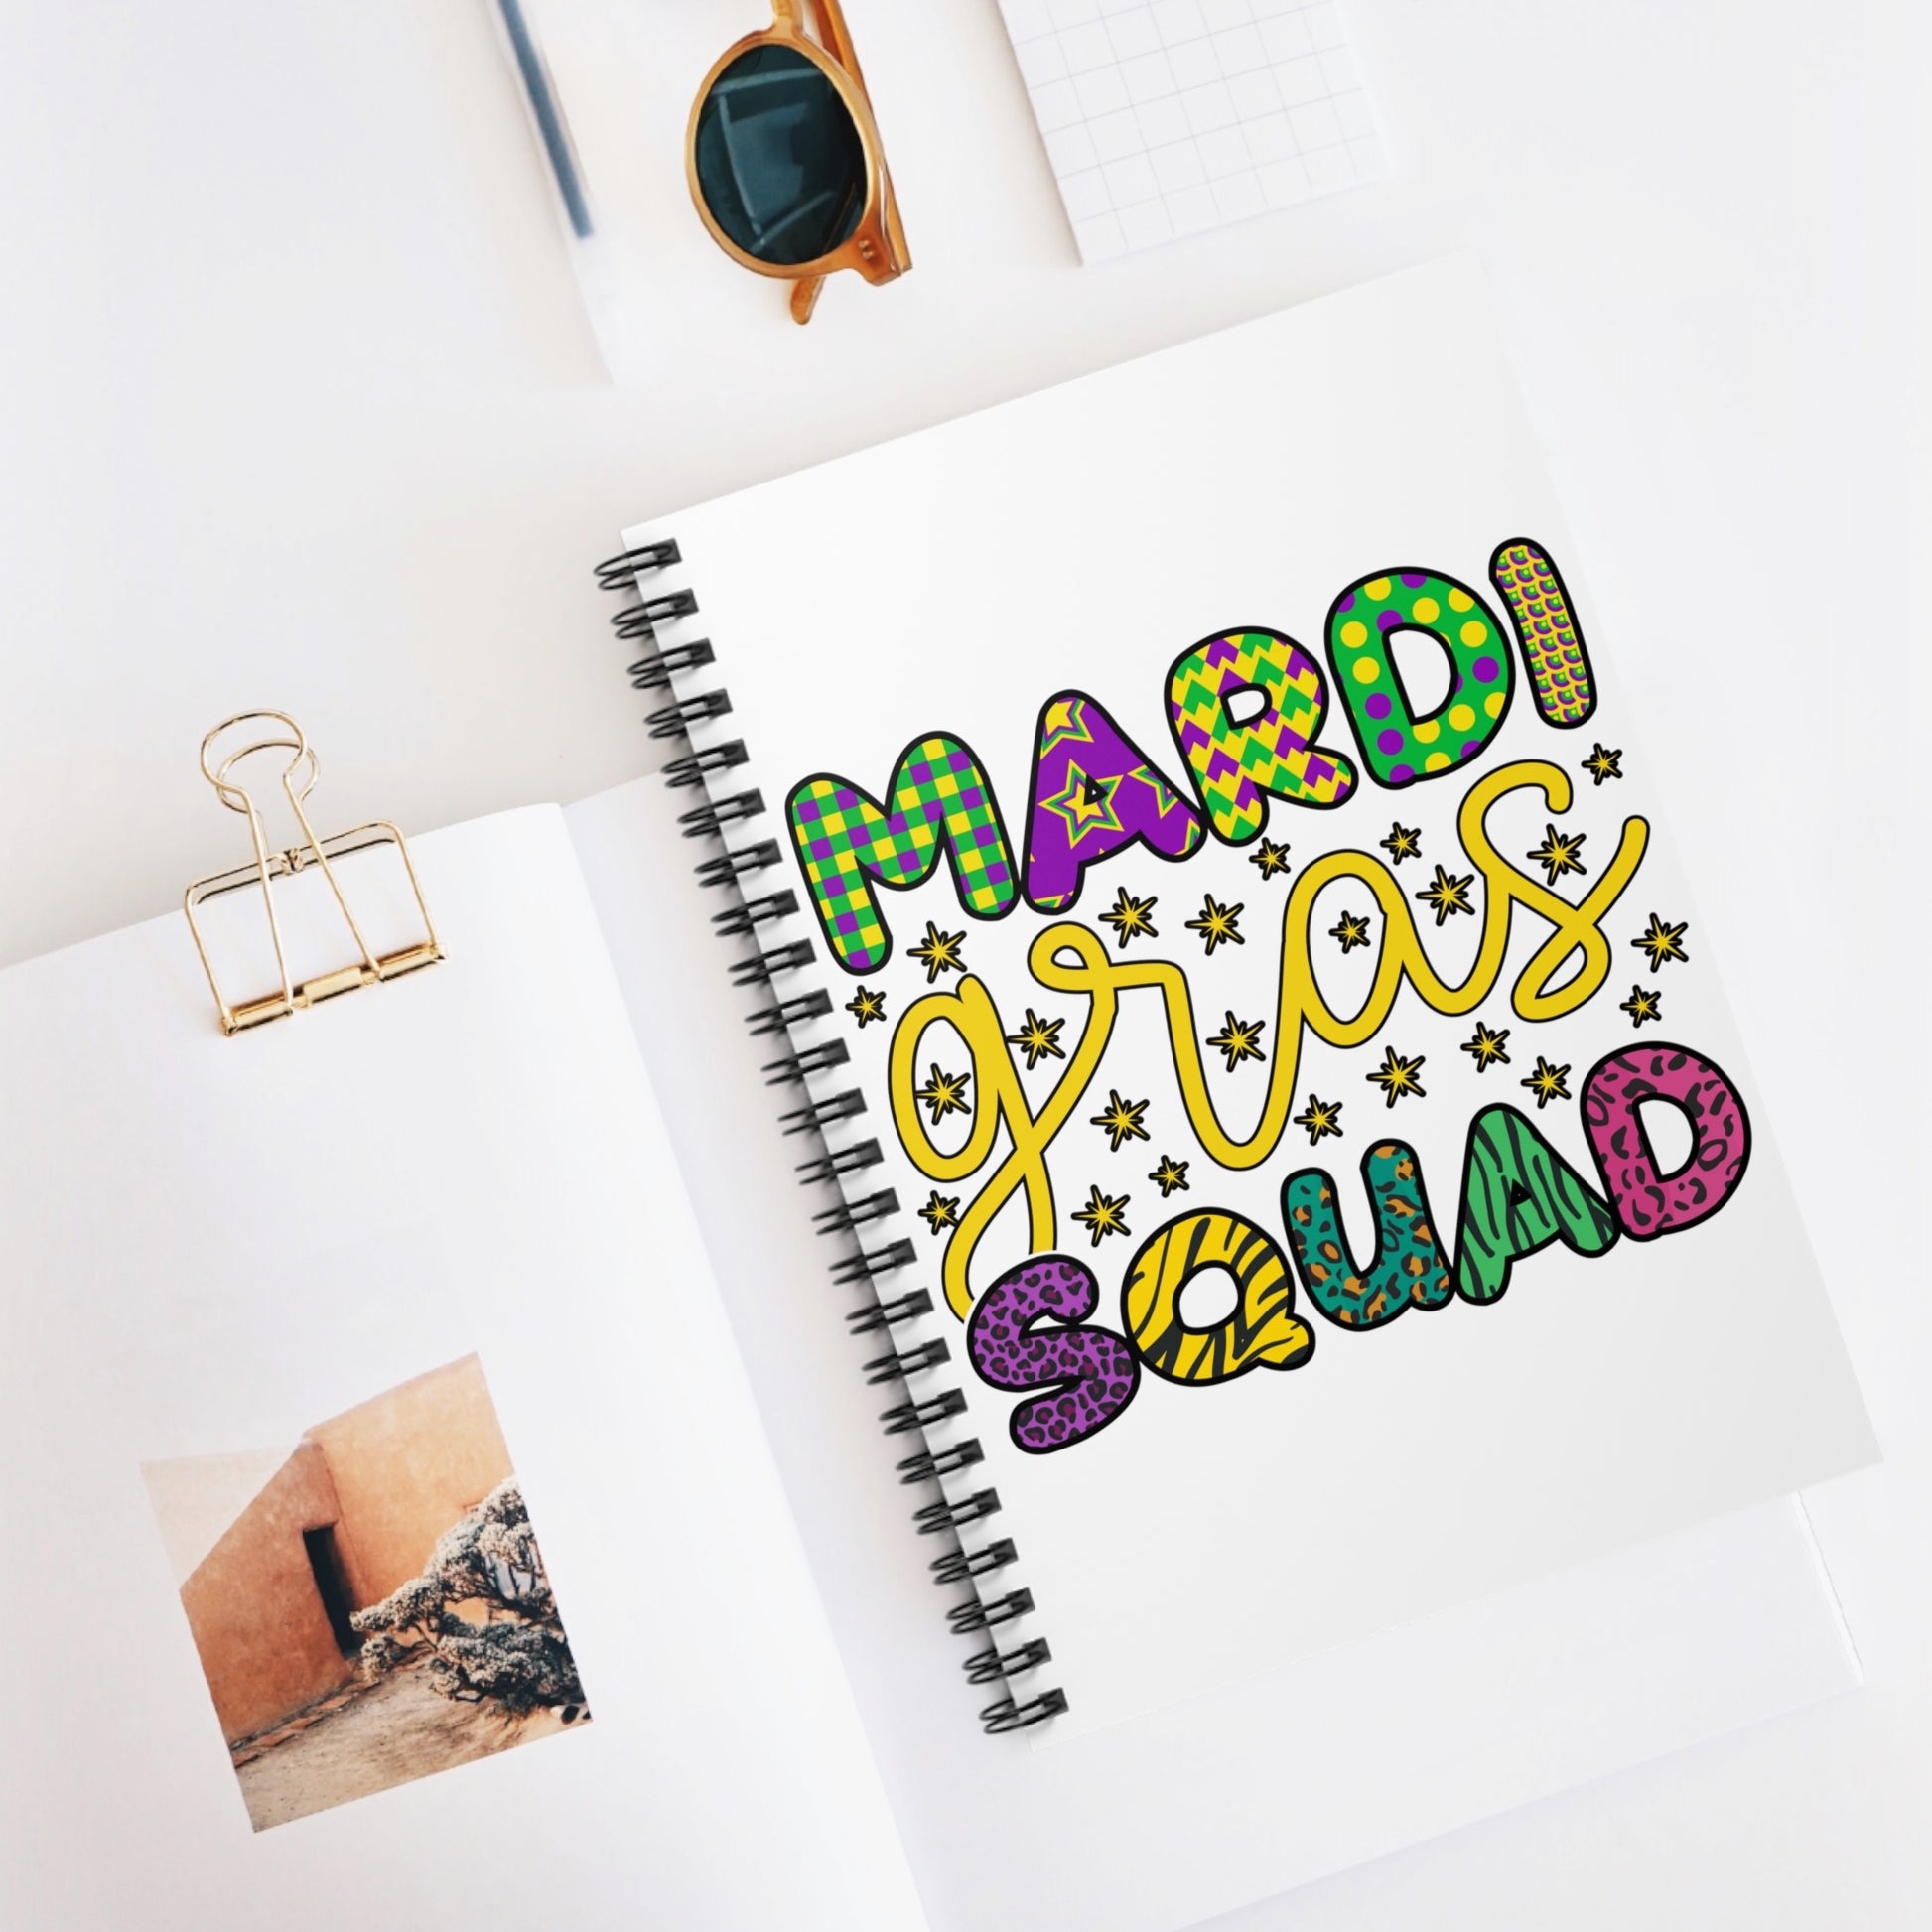 Mardi Gras Squad: Spiral Notebook - Log Books - Journals - Diaries - and More Custom Printed by TheGlassyLass